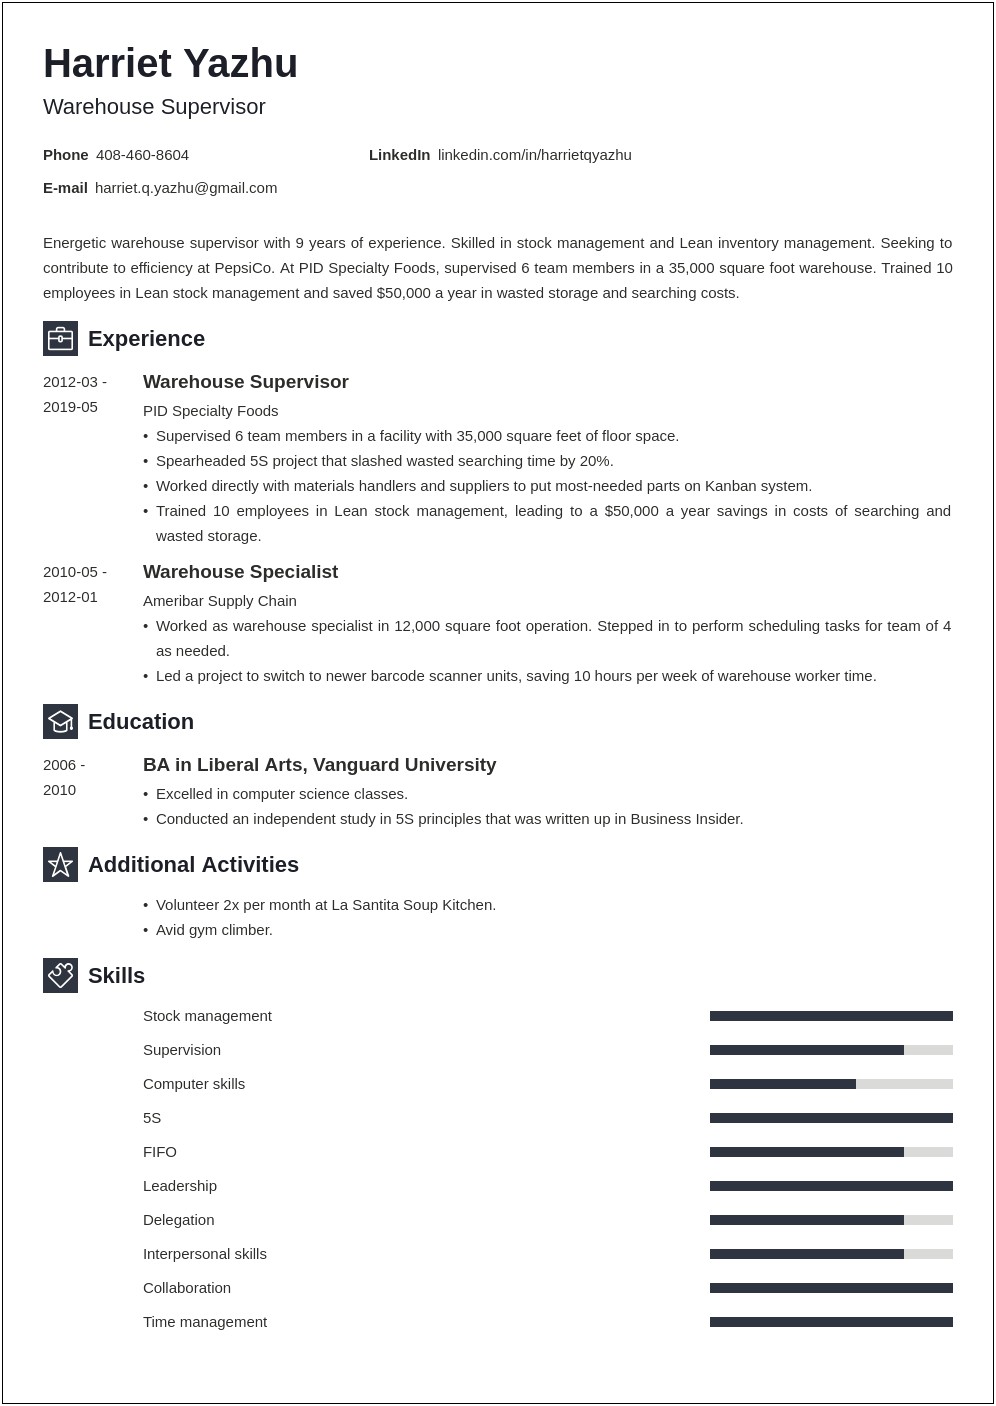 Resume Objective Examples For Supervisor Position